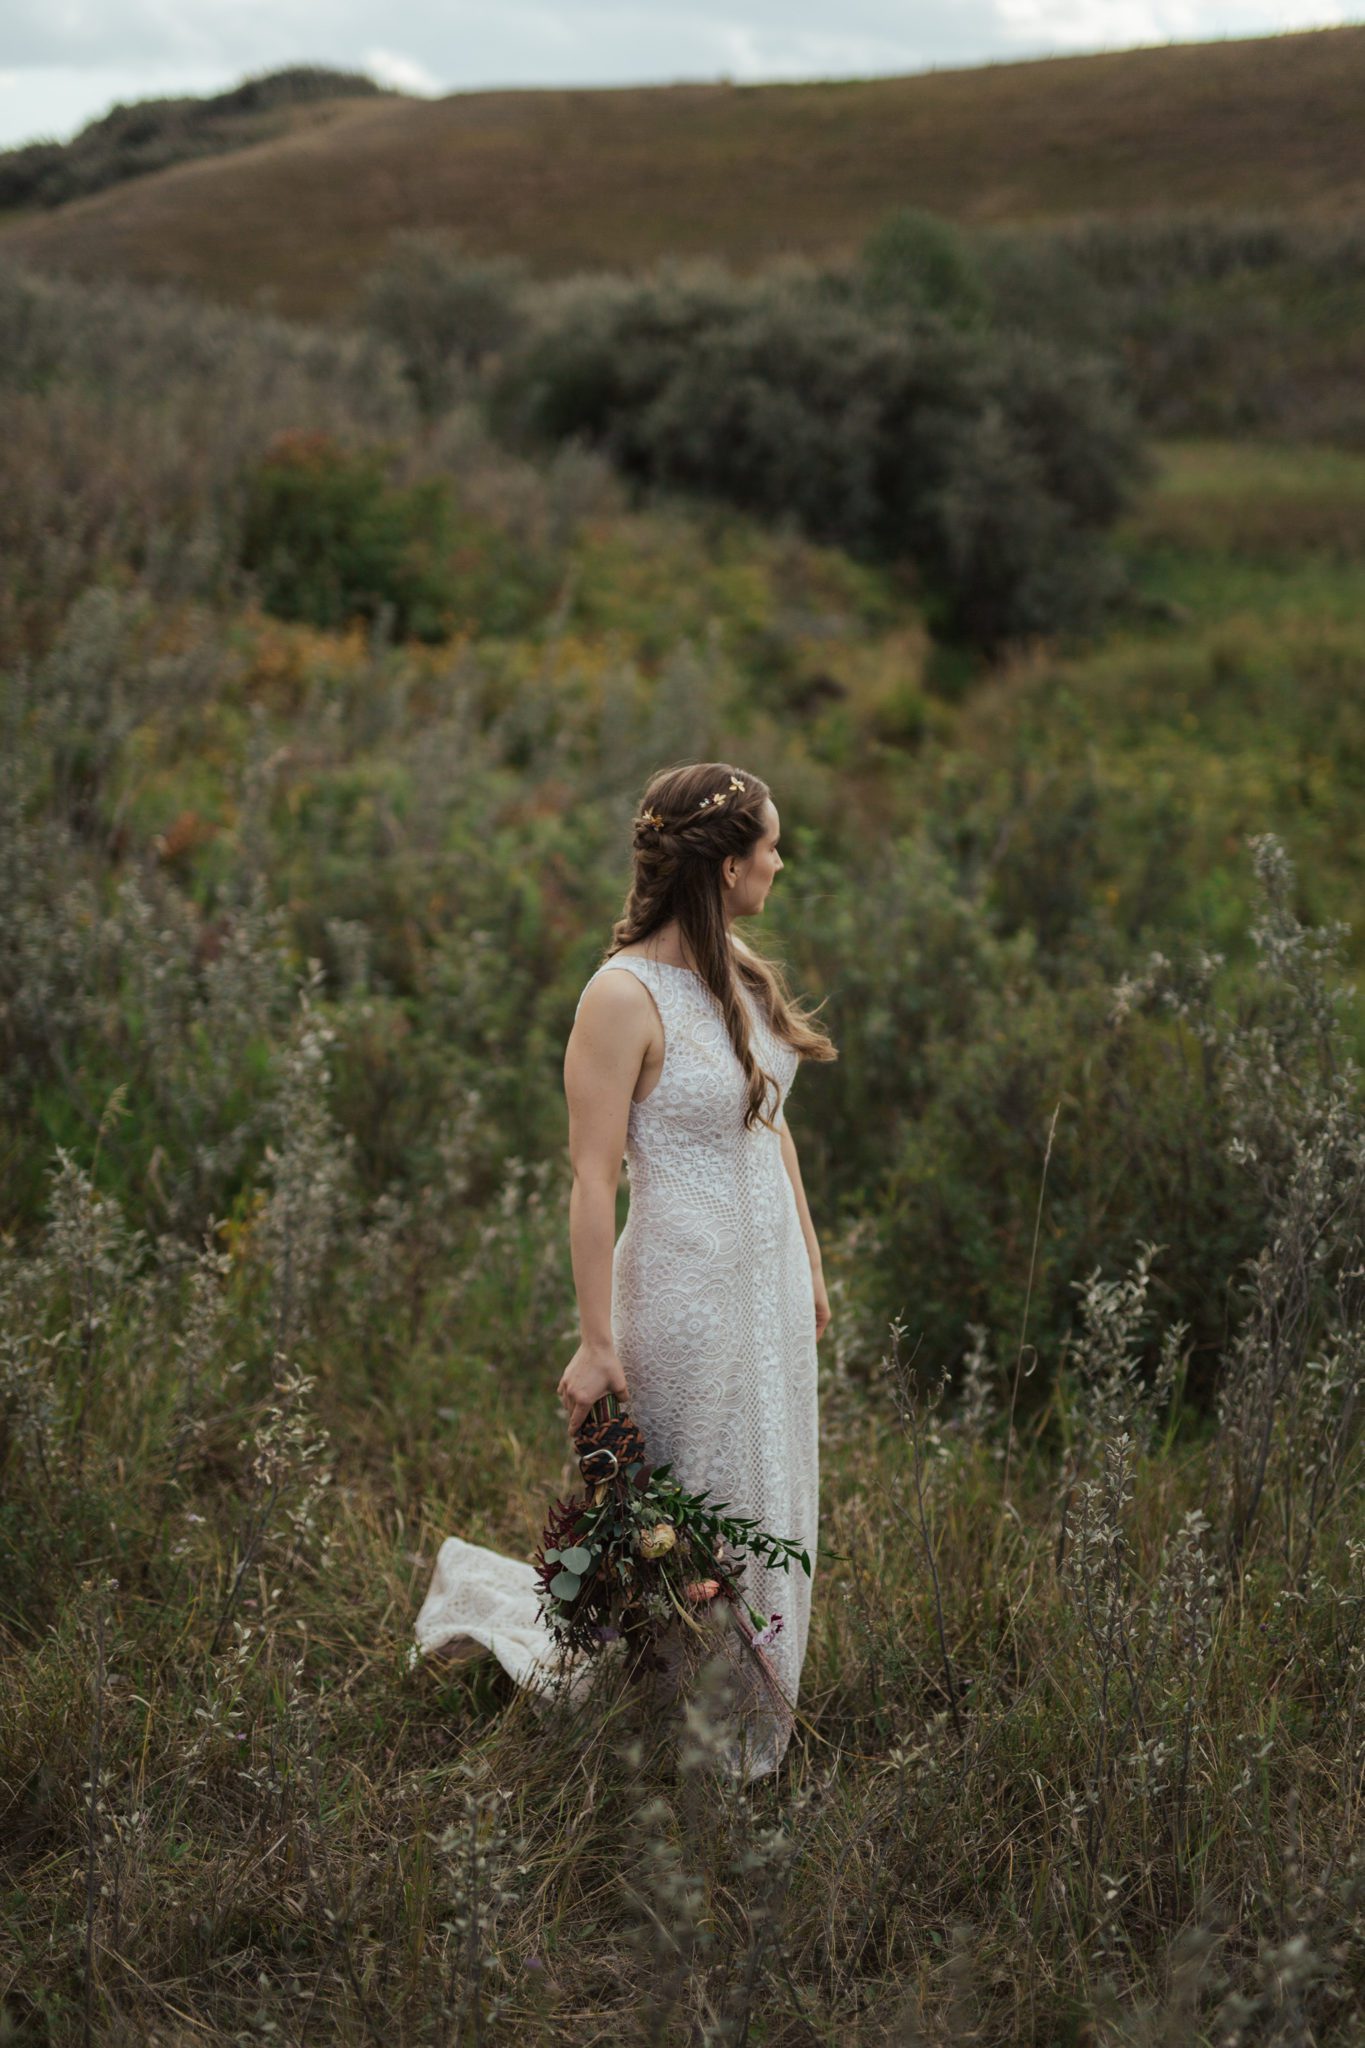 Portrait of bride in rural Alberta countryside holding fall-toned bridal bouquet, wearing lace-detailed bridal gown.